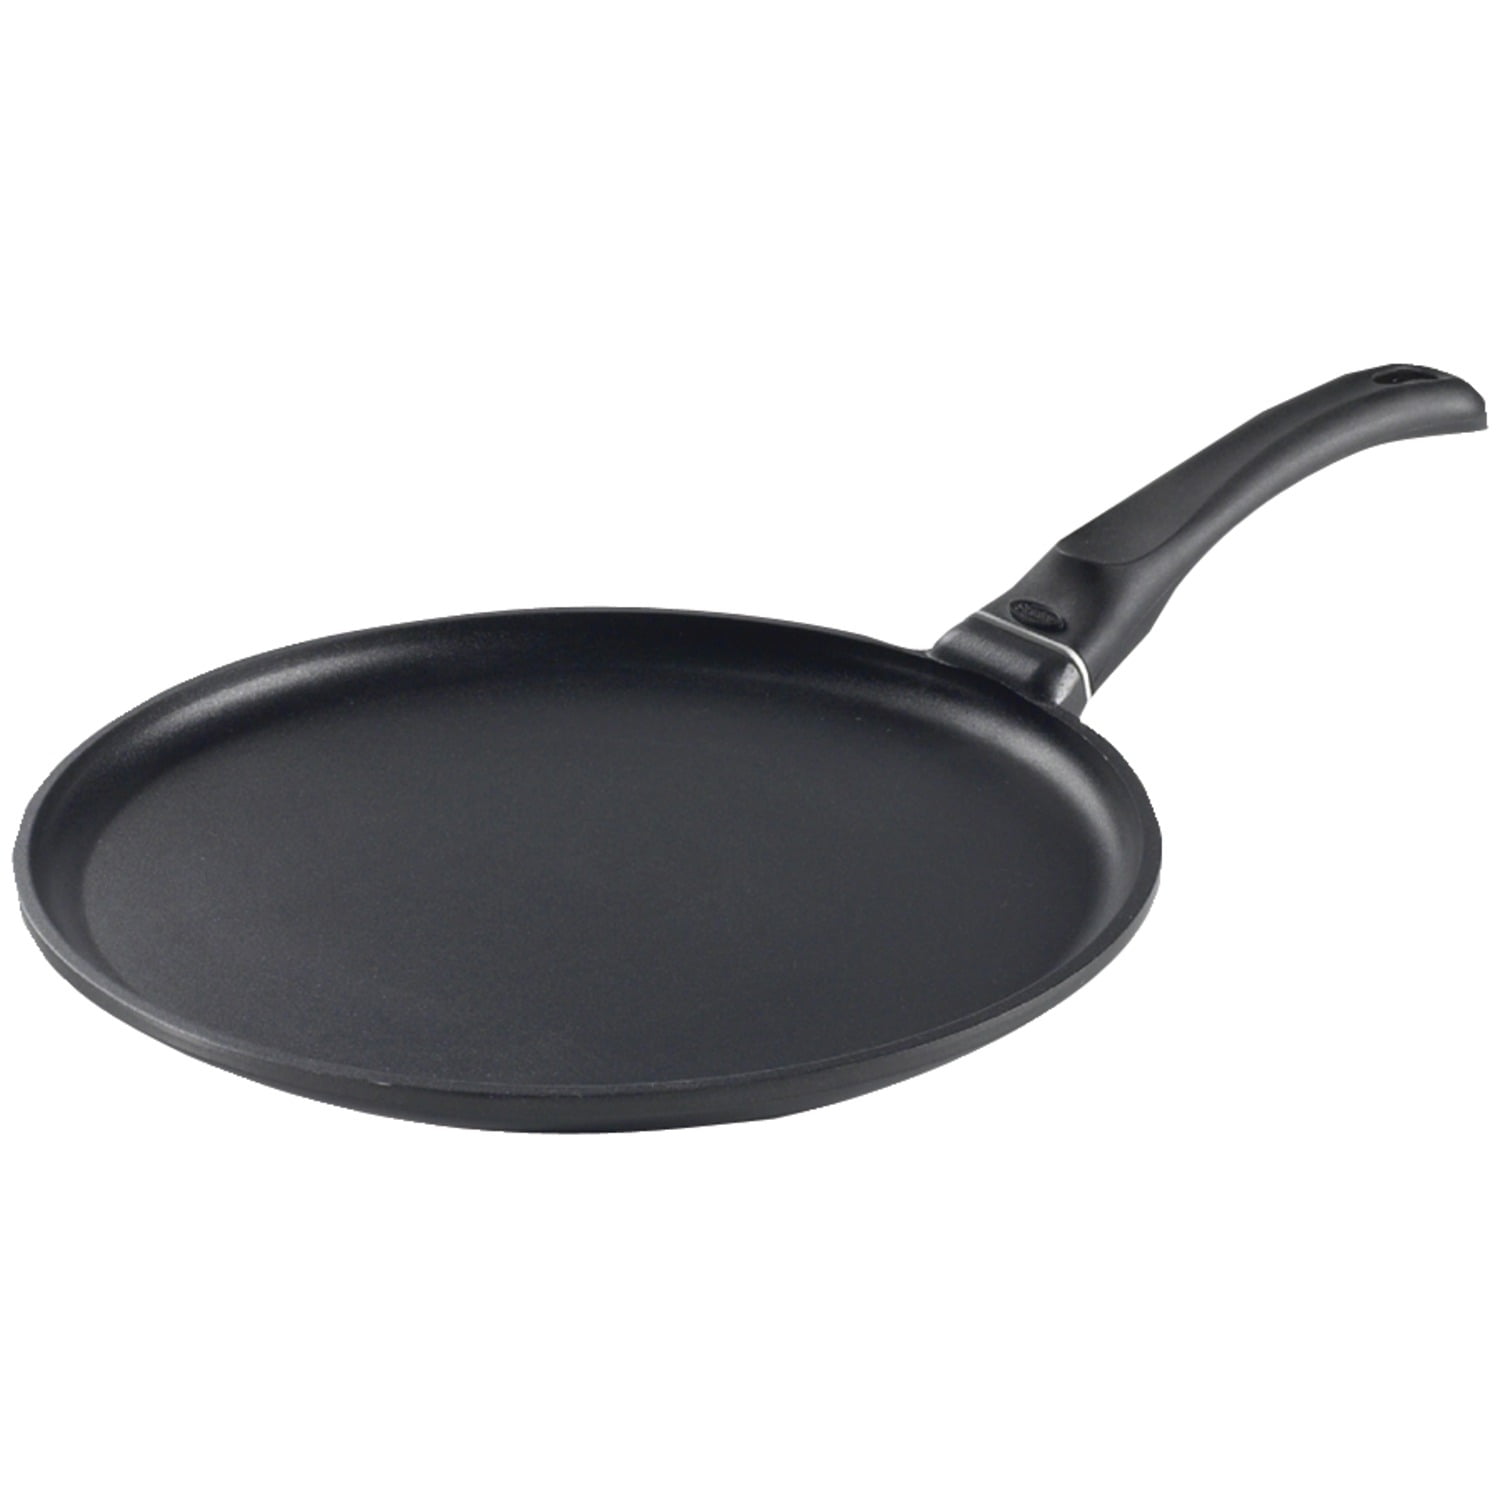 TeChef TECHEF - Stovetop Indoor Korean BBQ Nonstick Grill Pan with,  PFOA-Free, Dishwasher Oven Safe, Made in Korea